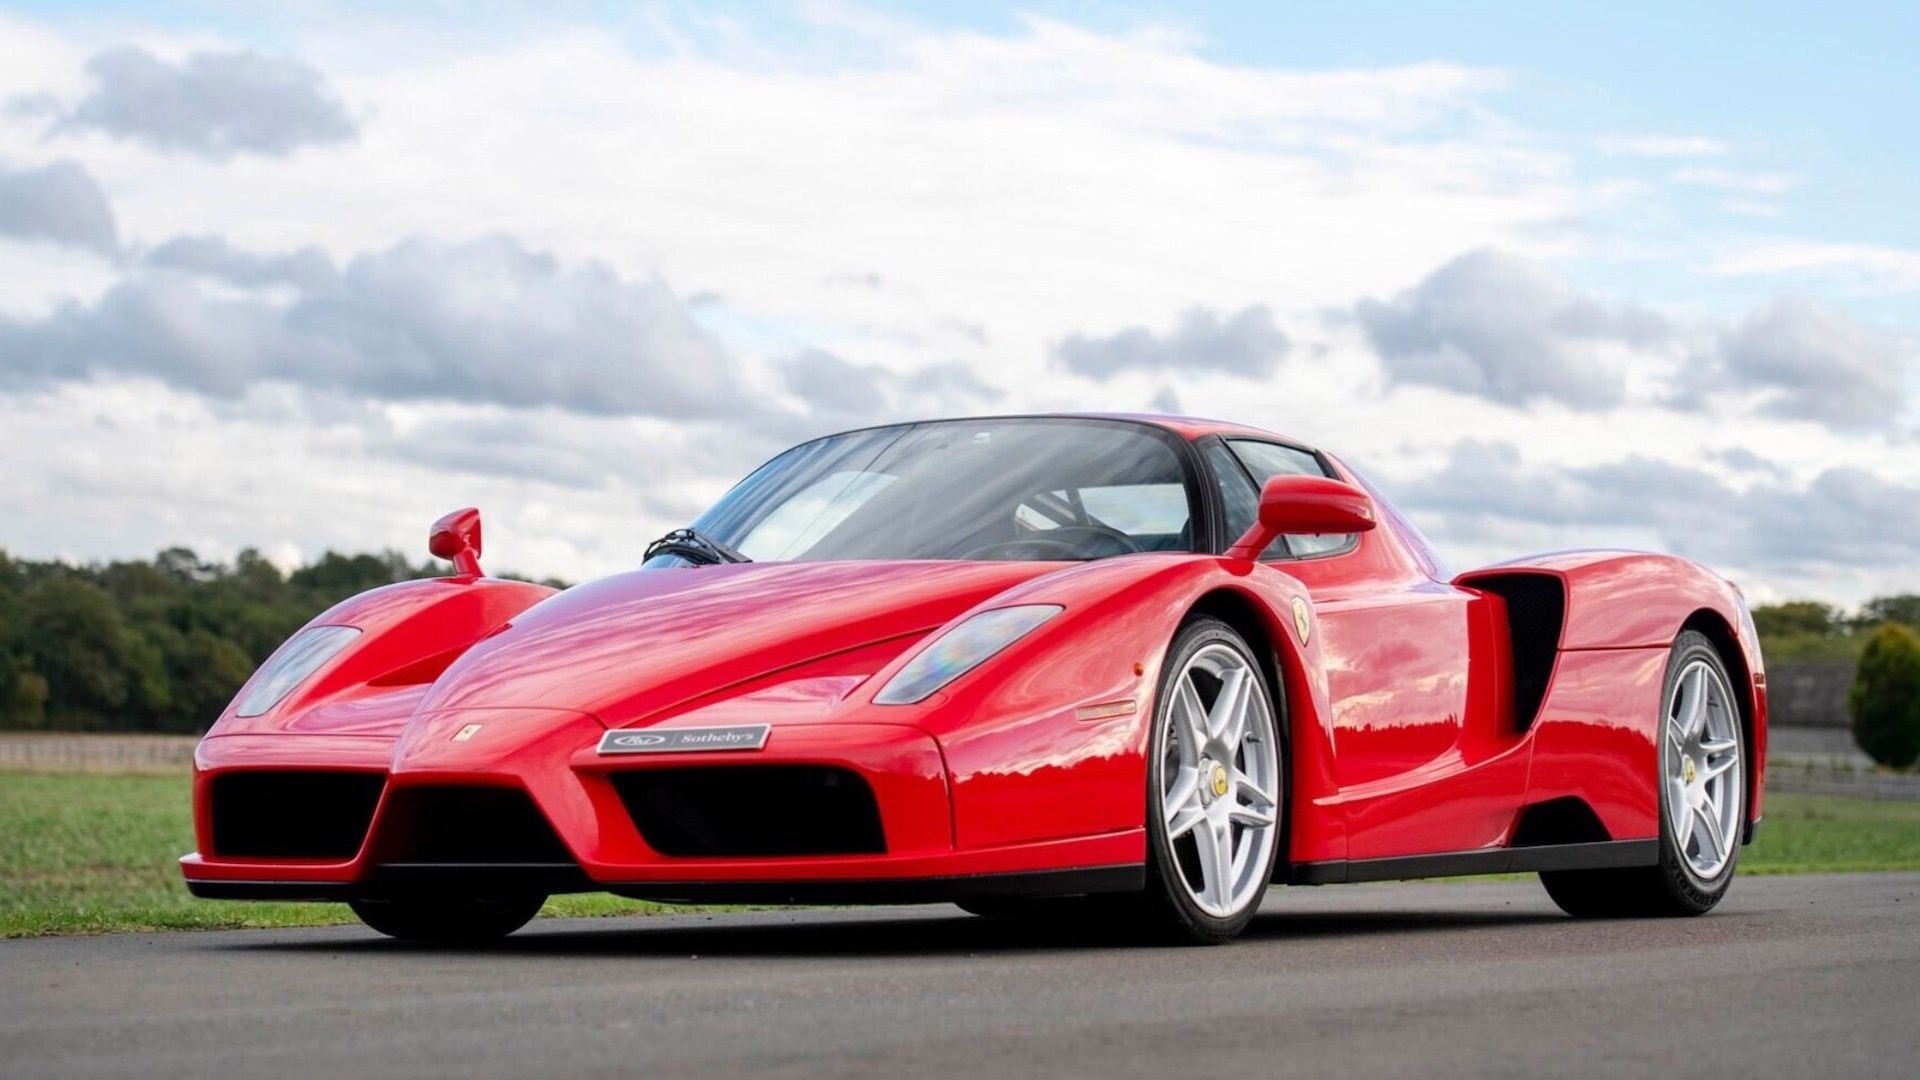 2003 Ferrari Enzo from The Gran Turismo Collection (photo via RM Sotheby's)